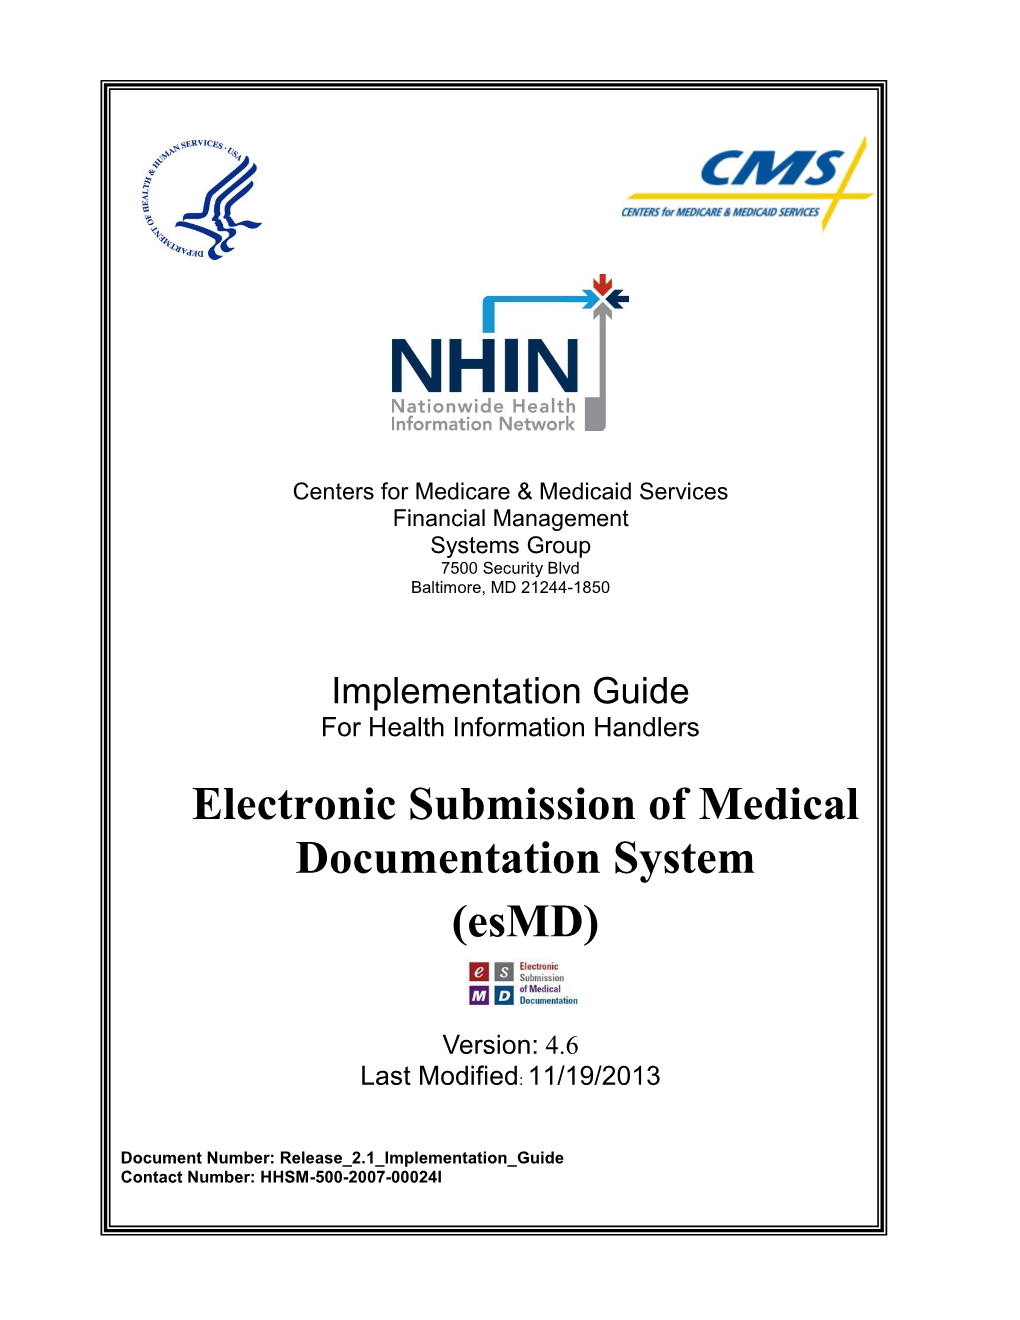 Electronic Submission of Medical Documentation System (Esmd)